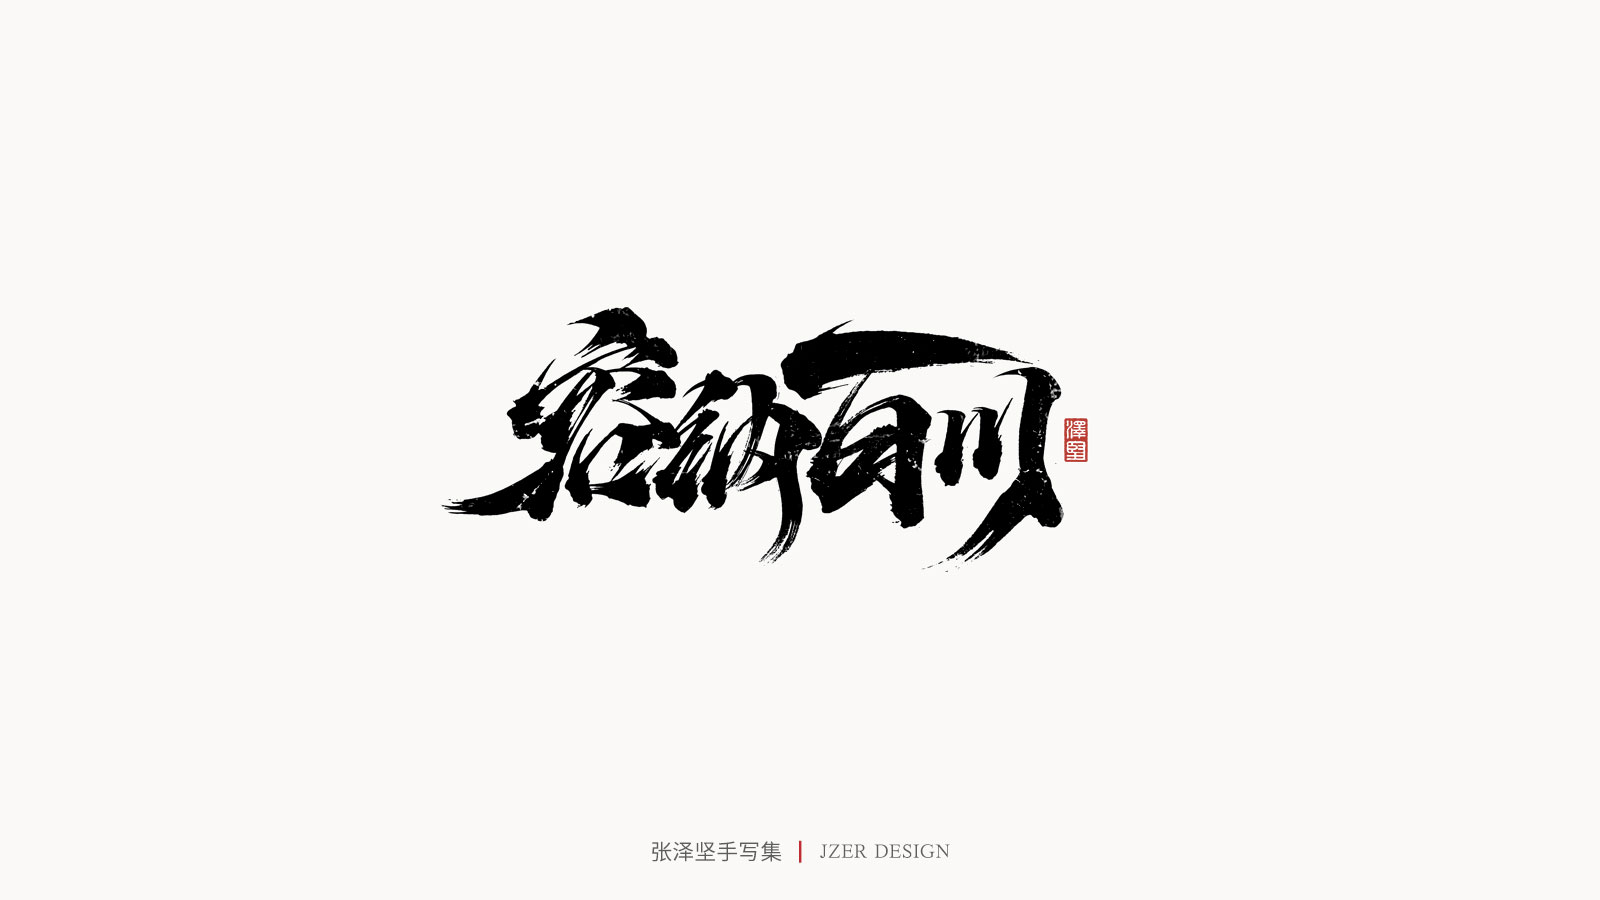 28P Collection of the latest Chinese font design schemes in 2021 #.50